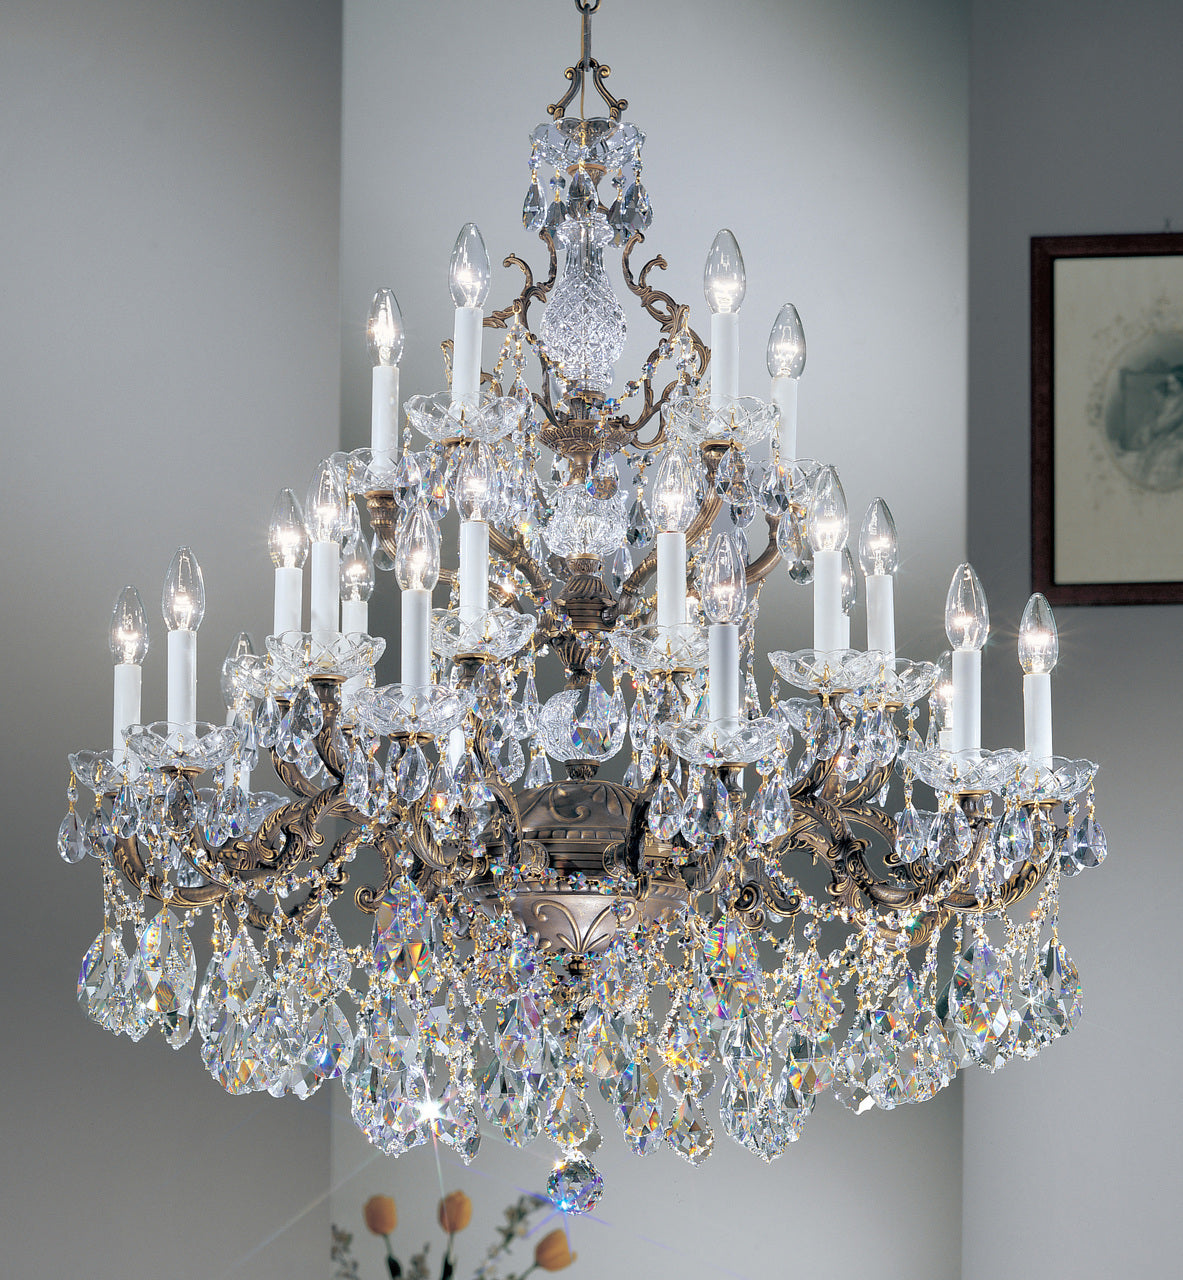 Classic Lighting 5545 RB SC Madrid Imperial Crystal/Cast Brass Chandelier in Roman Bronze (Imported from Spain)